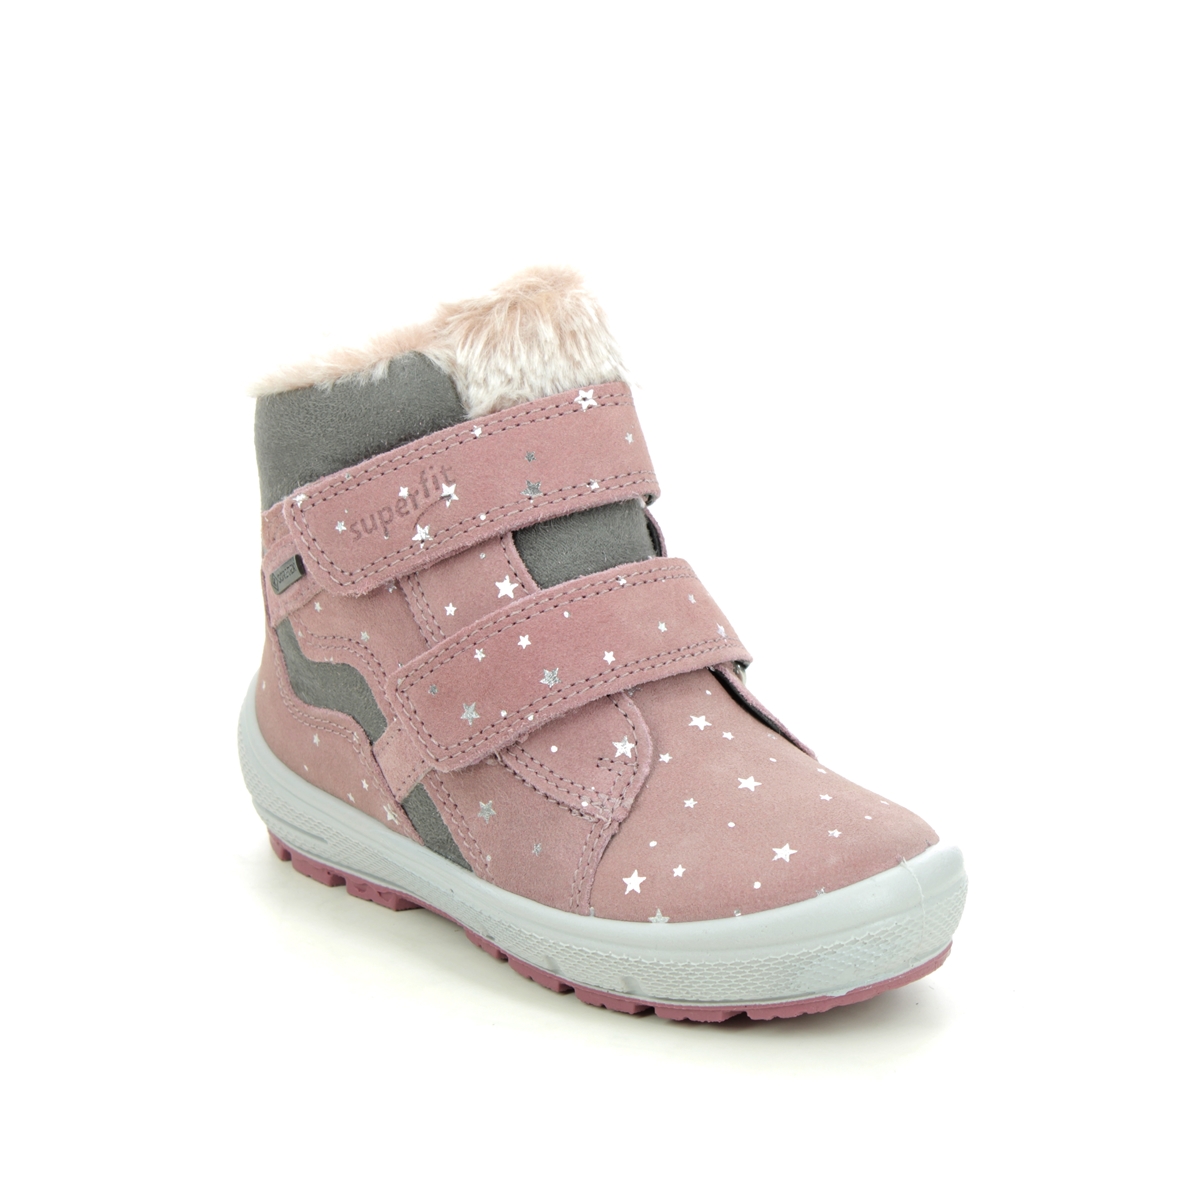 Superfit Groovy Gtx Pink Leather Kids Toddler Girls Boots 1006316-5500 In Size 24 In Plain Pink Leather